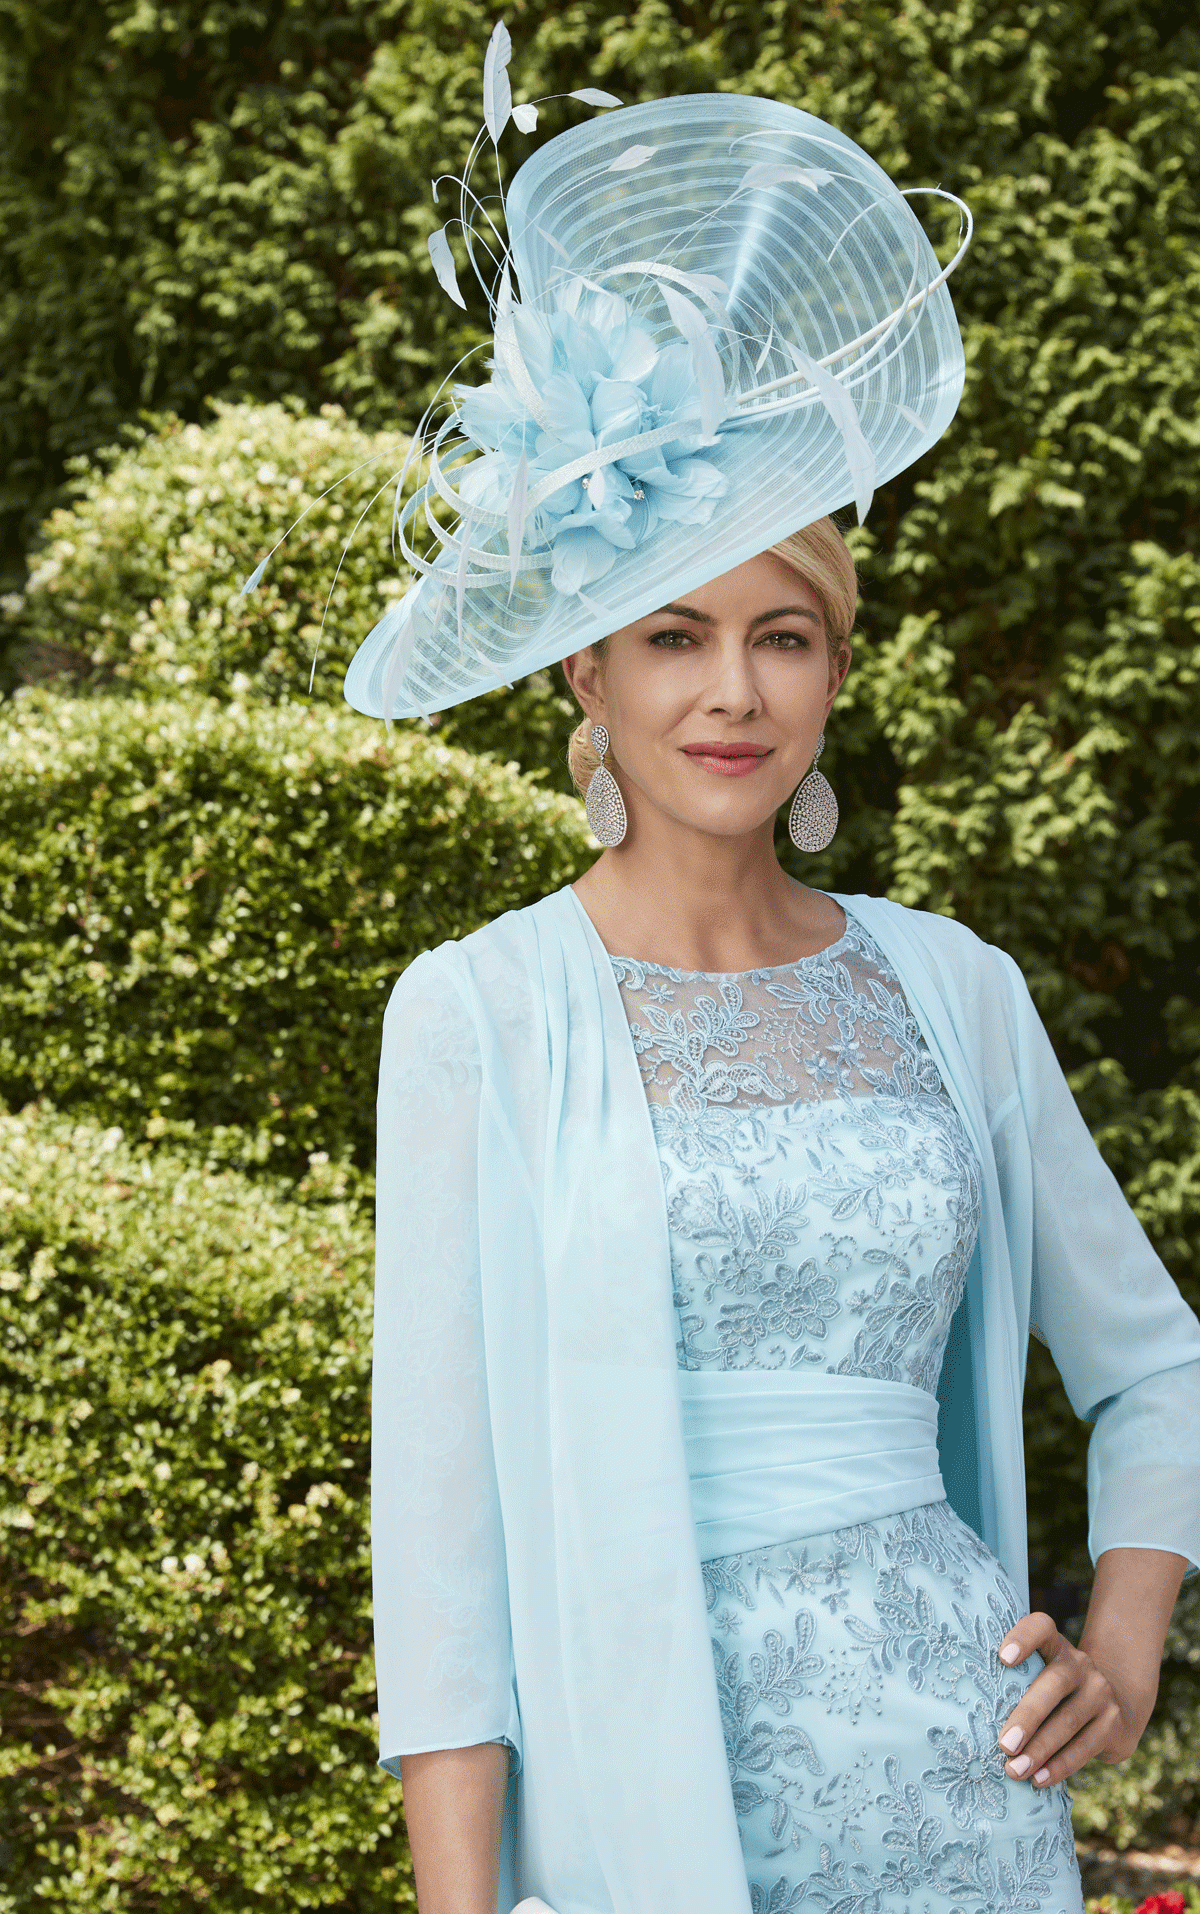 Veni Infantino - 991878 size 12 - Veni Infantino 991878 Turquoise / Aqua  fitted lace dress with 3/4 length sleeves & Chiffon coat - Stunning Mother of the Bride & Mother of the Groom dresses at Occasions by Blessings, Loyal Parade, Mill Rise, Westdene, Brighton. East Sussex BN1 5GG T: 01273 505766 E: Occasions@blessingsbridal.co.uk